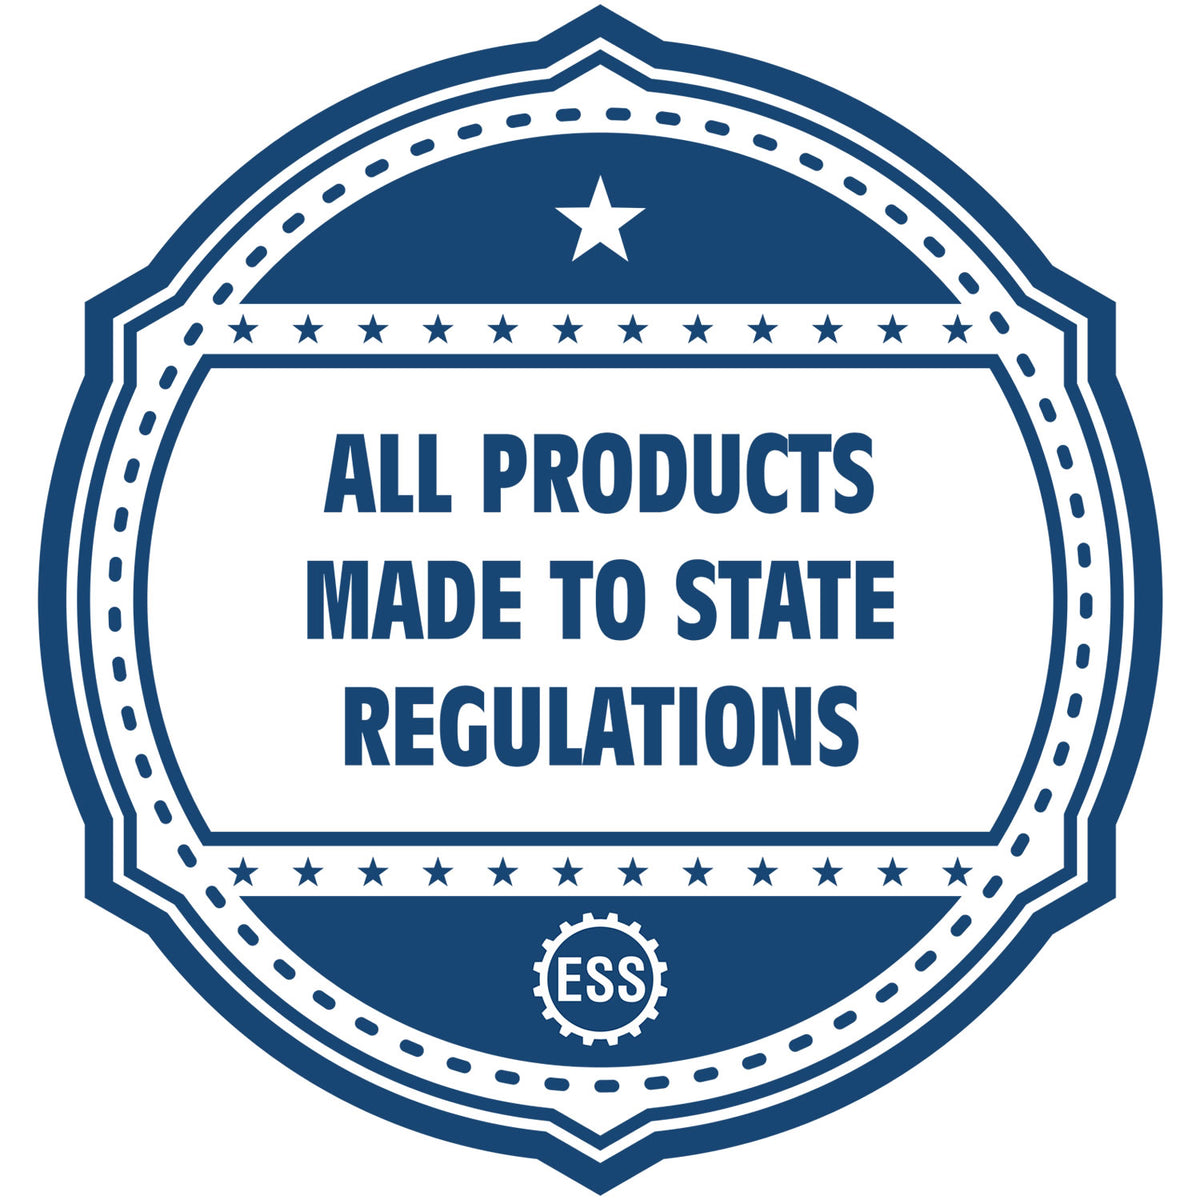 A blue icon or badge for the Hybrid Texas Engineer Seal showing that this product is made in compliance with state regulations.